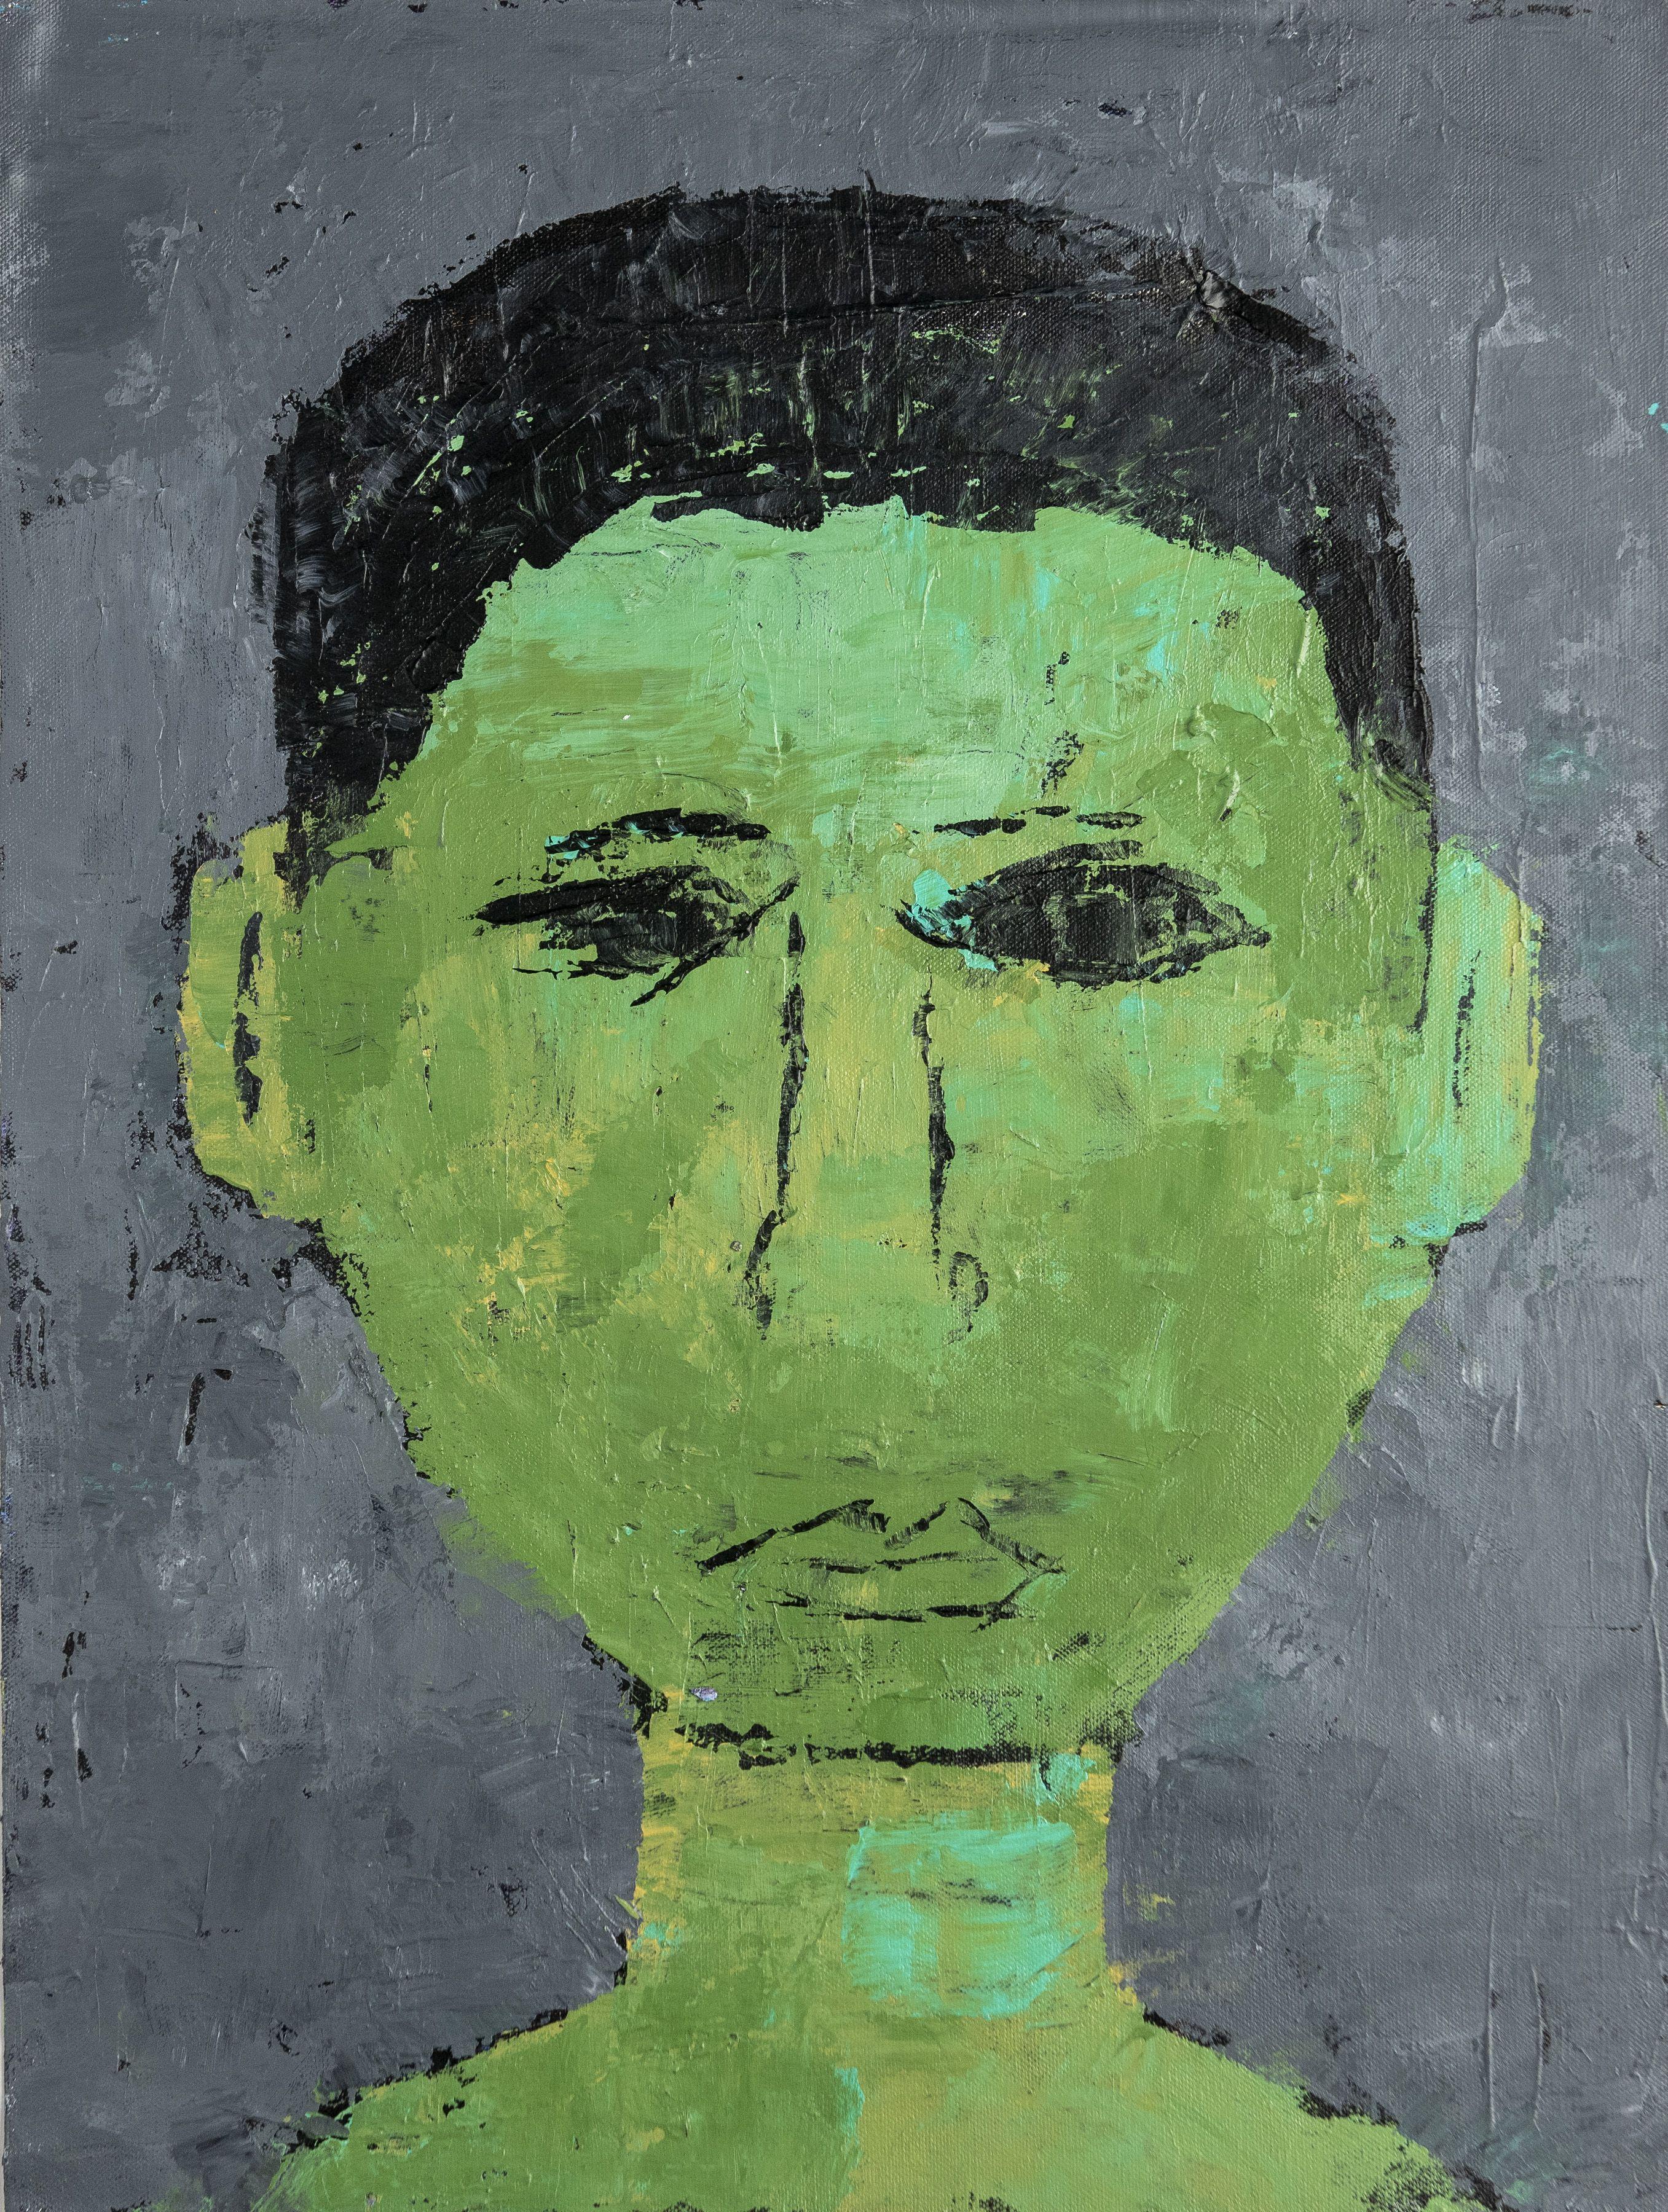 This work is part of a series of portraits of friends/strangers painted after an extended stay in Morocco.  The work is typical of the artist's expressionist style and was part of the show he was working on when he died. It demonstrates the